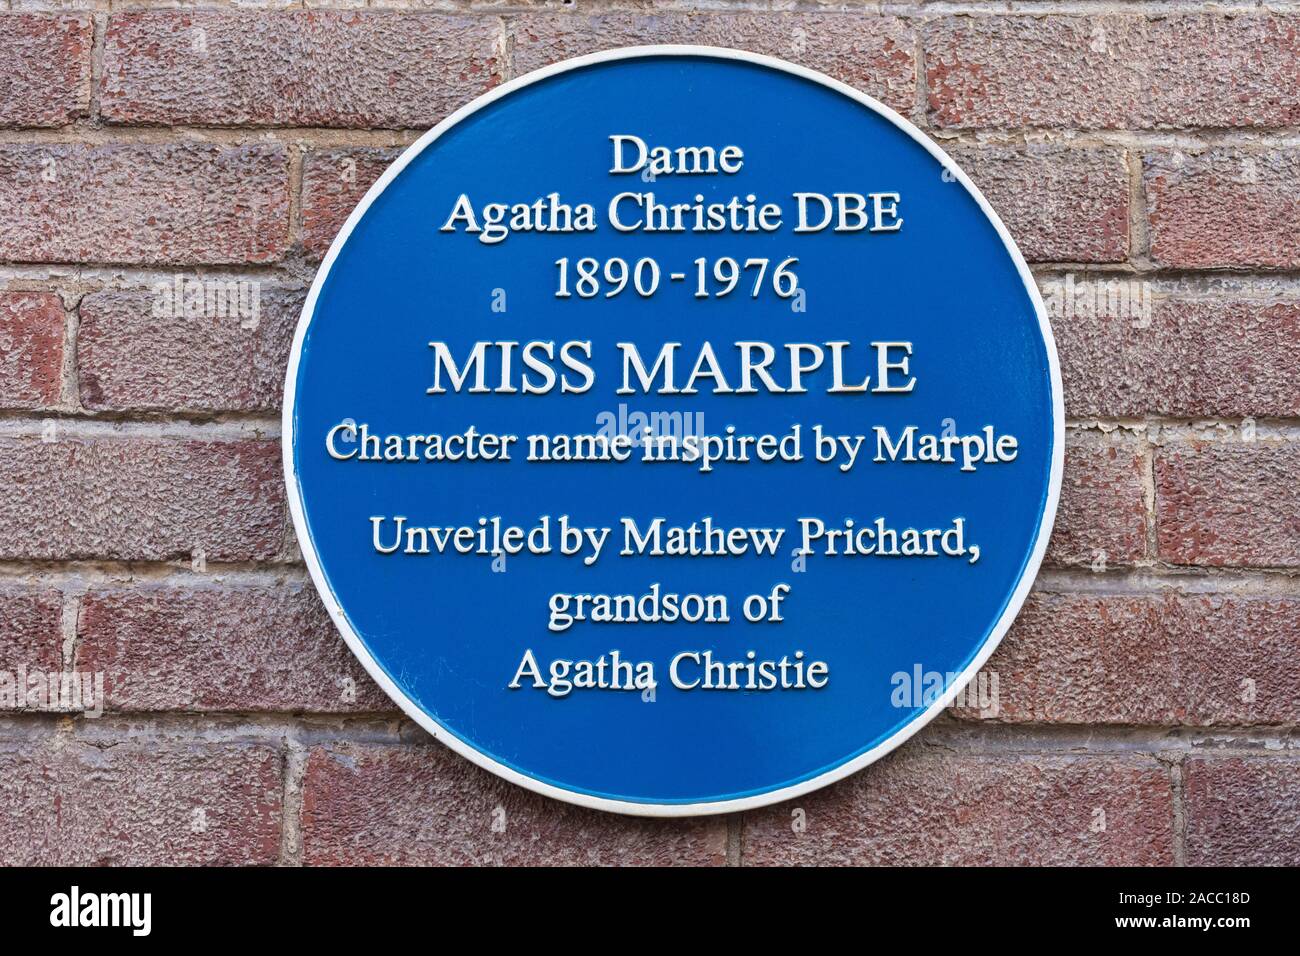 Blue plaque at the railway station commemorating Agatha Christie's character Miss Marple inspired by the name of the town.  Marple, Gtr Manchester, UK Stock Photo